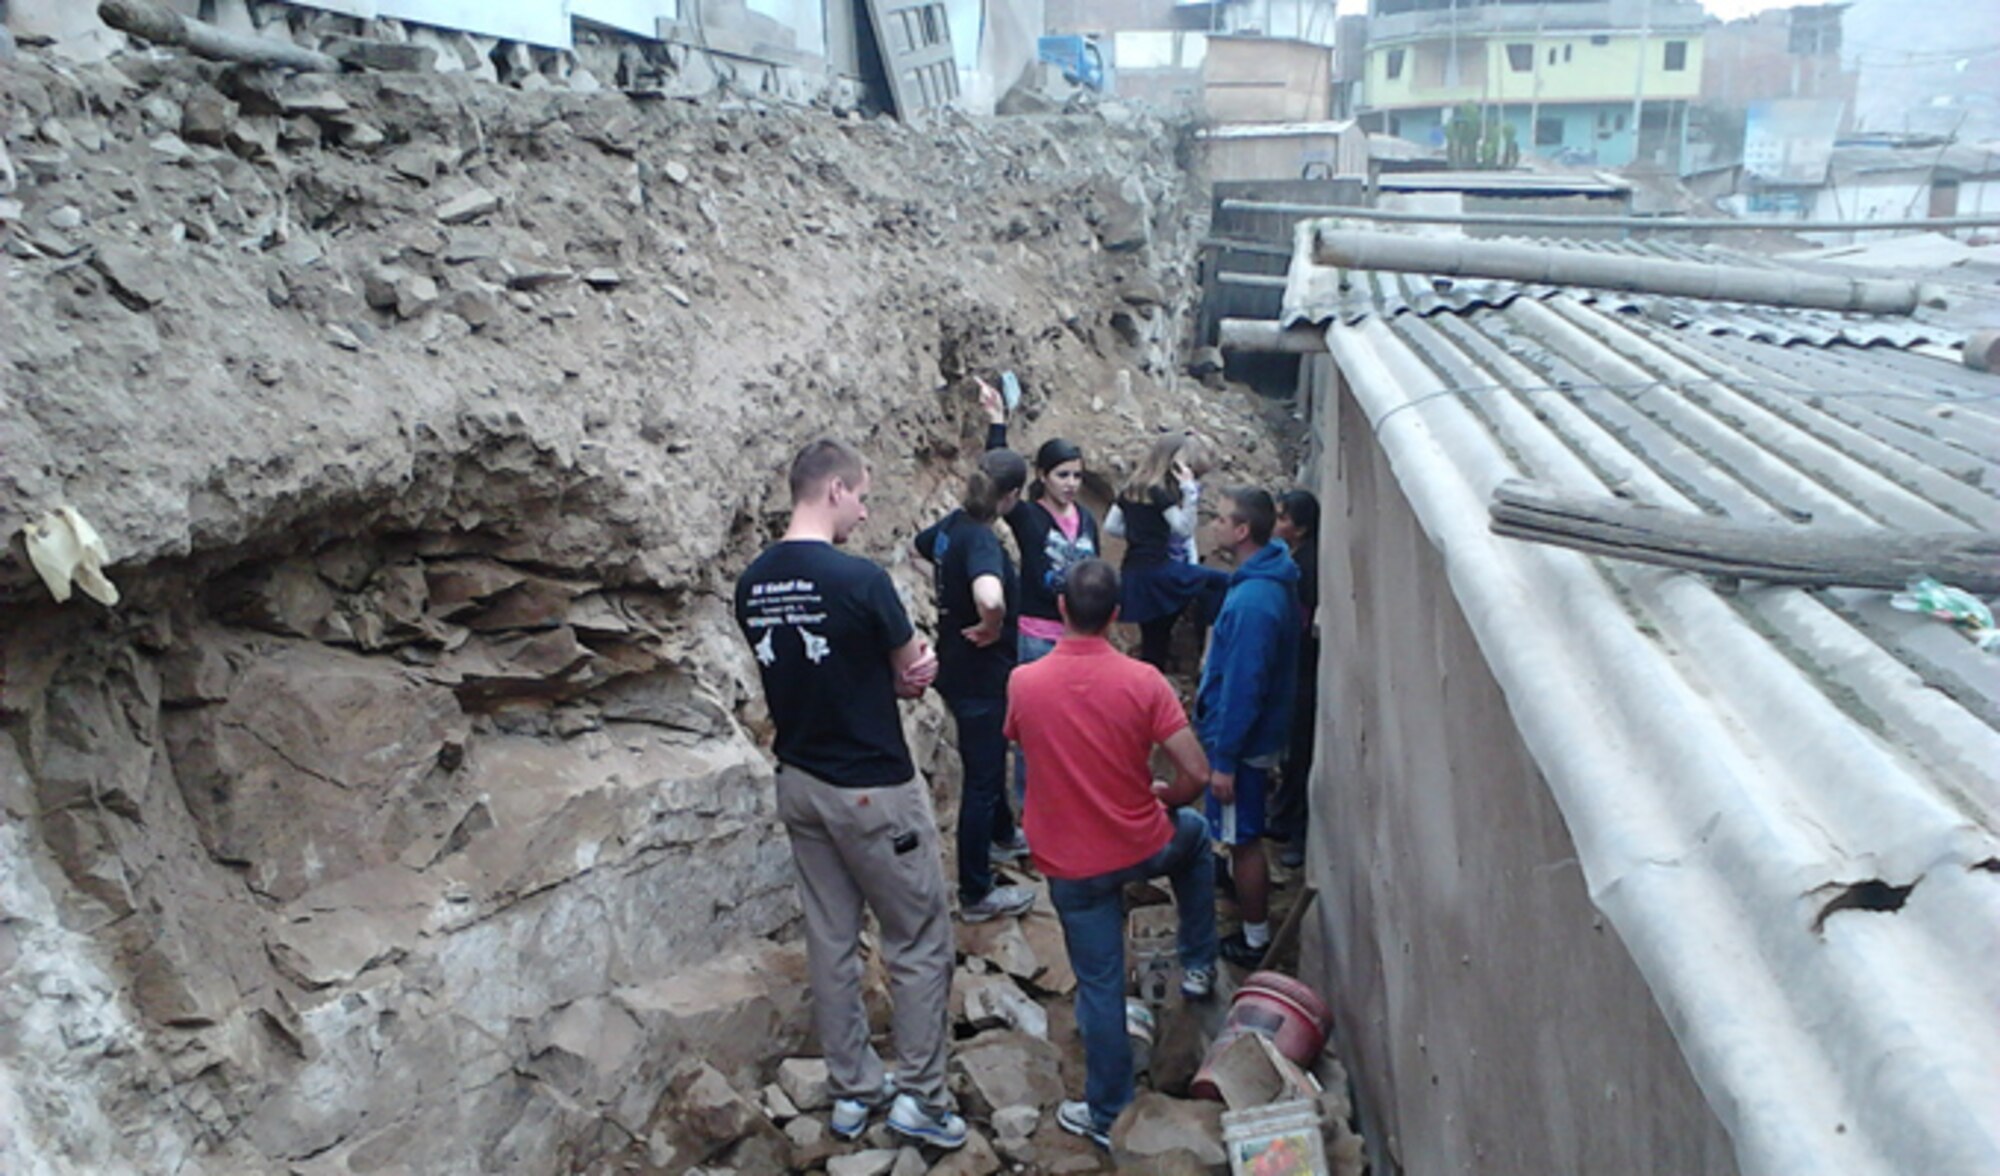 A volunteer group of Air Force and Navy engineers, led by Sarah Rebeca Vieira de Azevedo Ribeiro (middle, facing forward), work to prevent a mudslide threatening a home in an impoverished part of Lima, Peru. Sarah is the fiancée of Maj. Paul Morris, a former international exchange officer who represented the U.S. Air Force as an embedded flight officer with the Peruvian air forces. (Courtesy photo/Maj. Paul Morris)